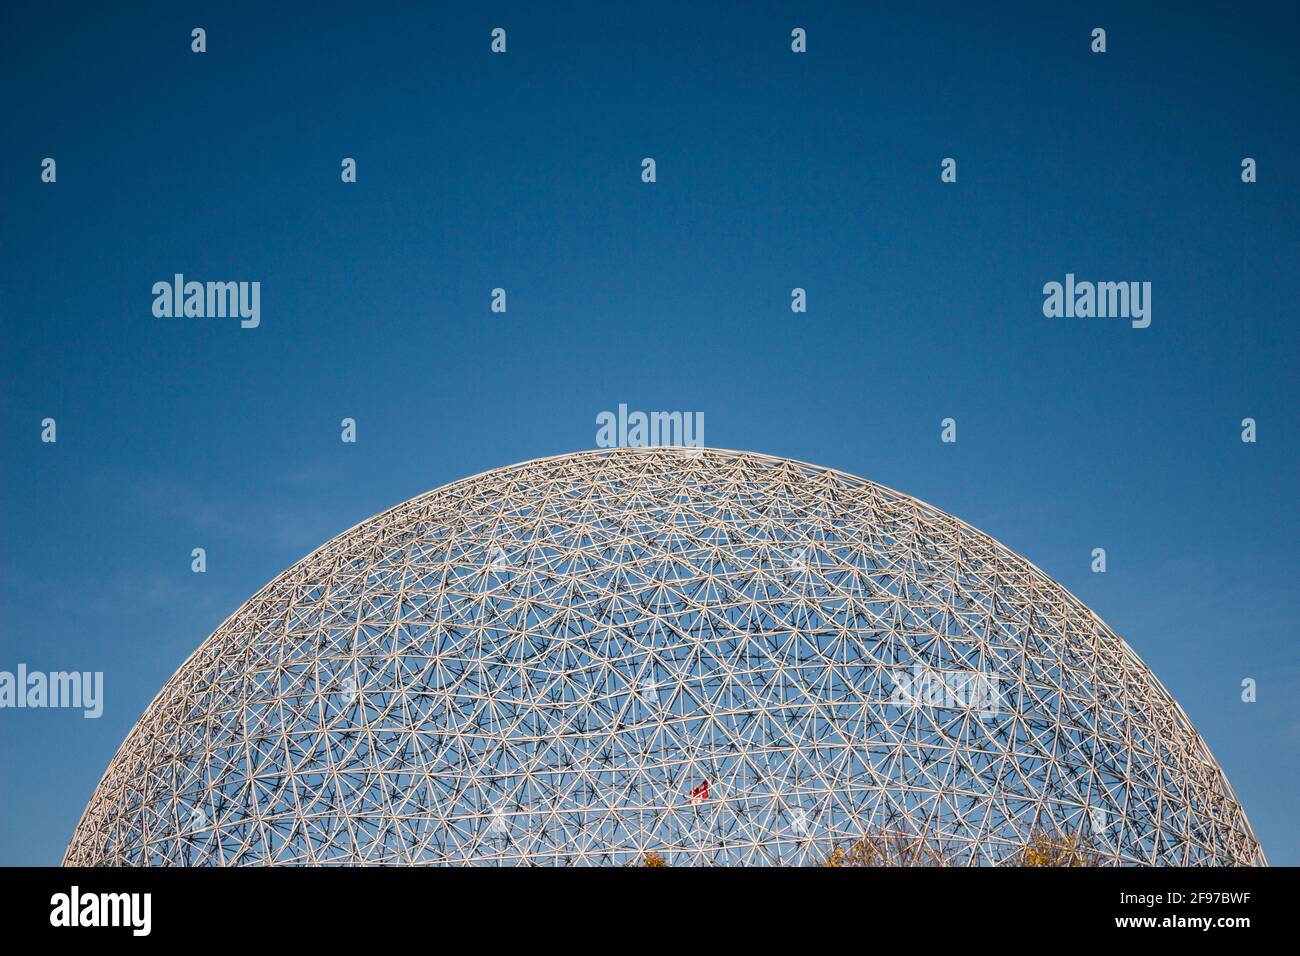 The dome of the Biosphere against the blue sky of early fall. Taken at Montreal's Jean-Drapeau Park. The museum is dedicated to the environment, it wa Stock Photo